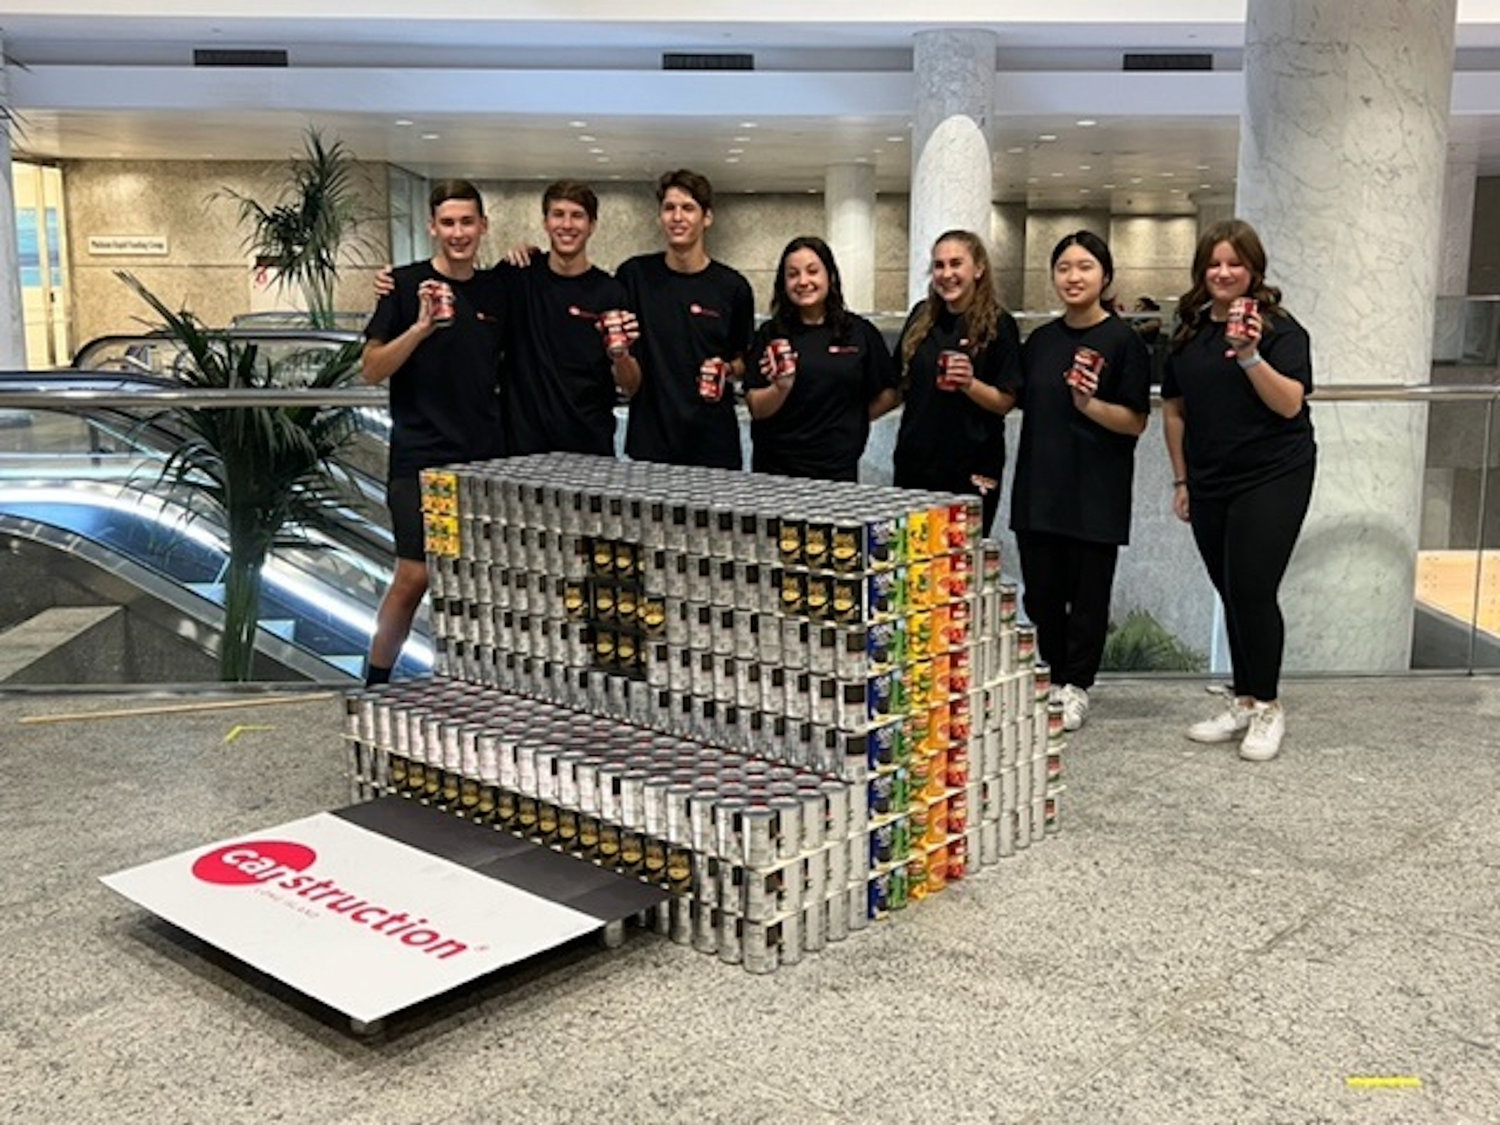 East Rockaway High School students with their Canstruction creation, a Polaroid camera constructed of 1,678 cans of food.